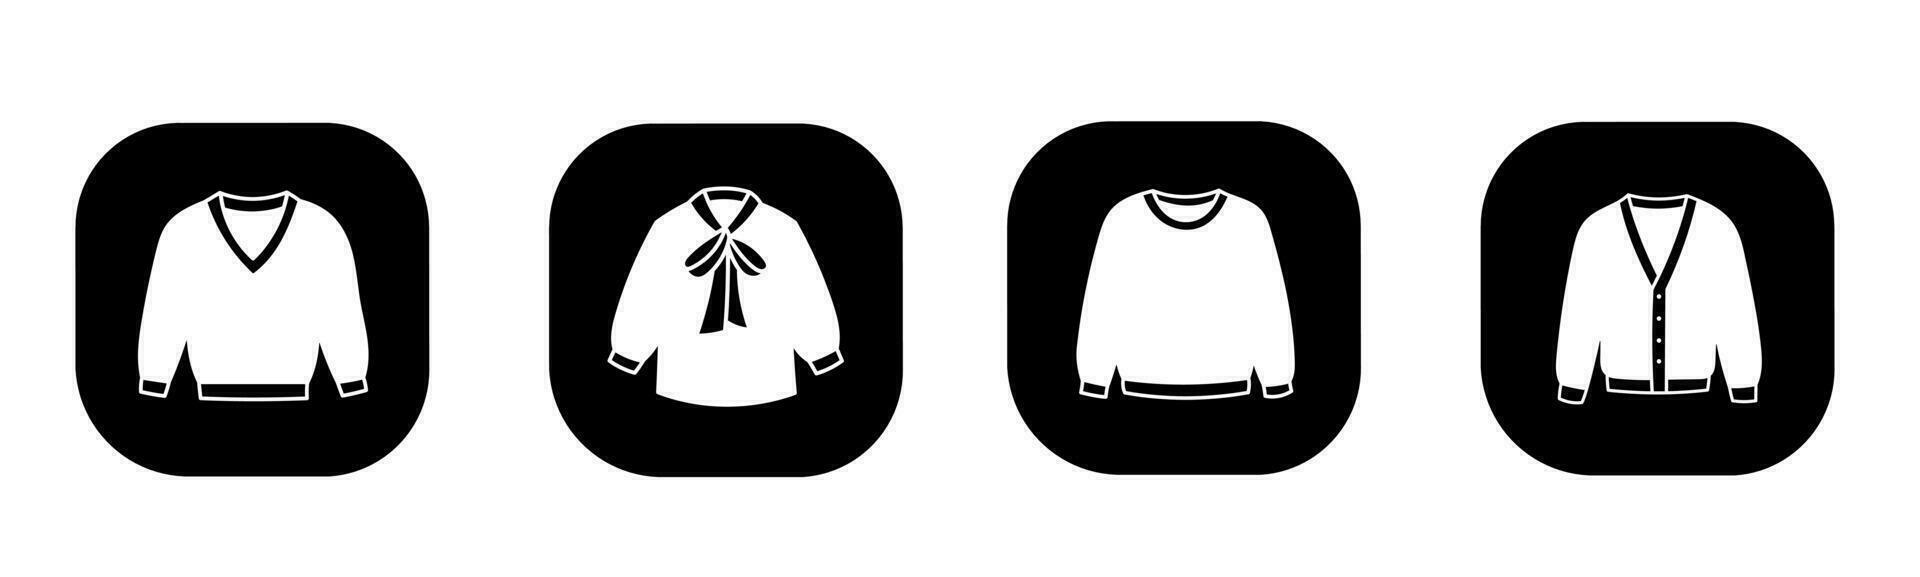 Sweater icon in flat. A sweater icon design. Stock vector. vector